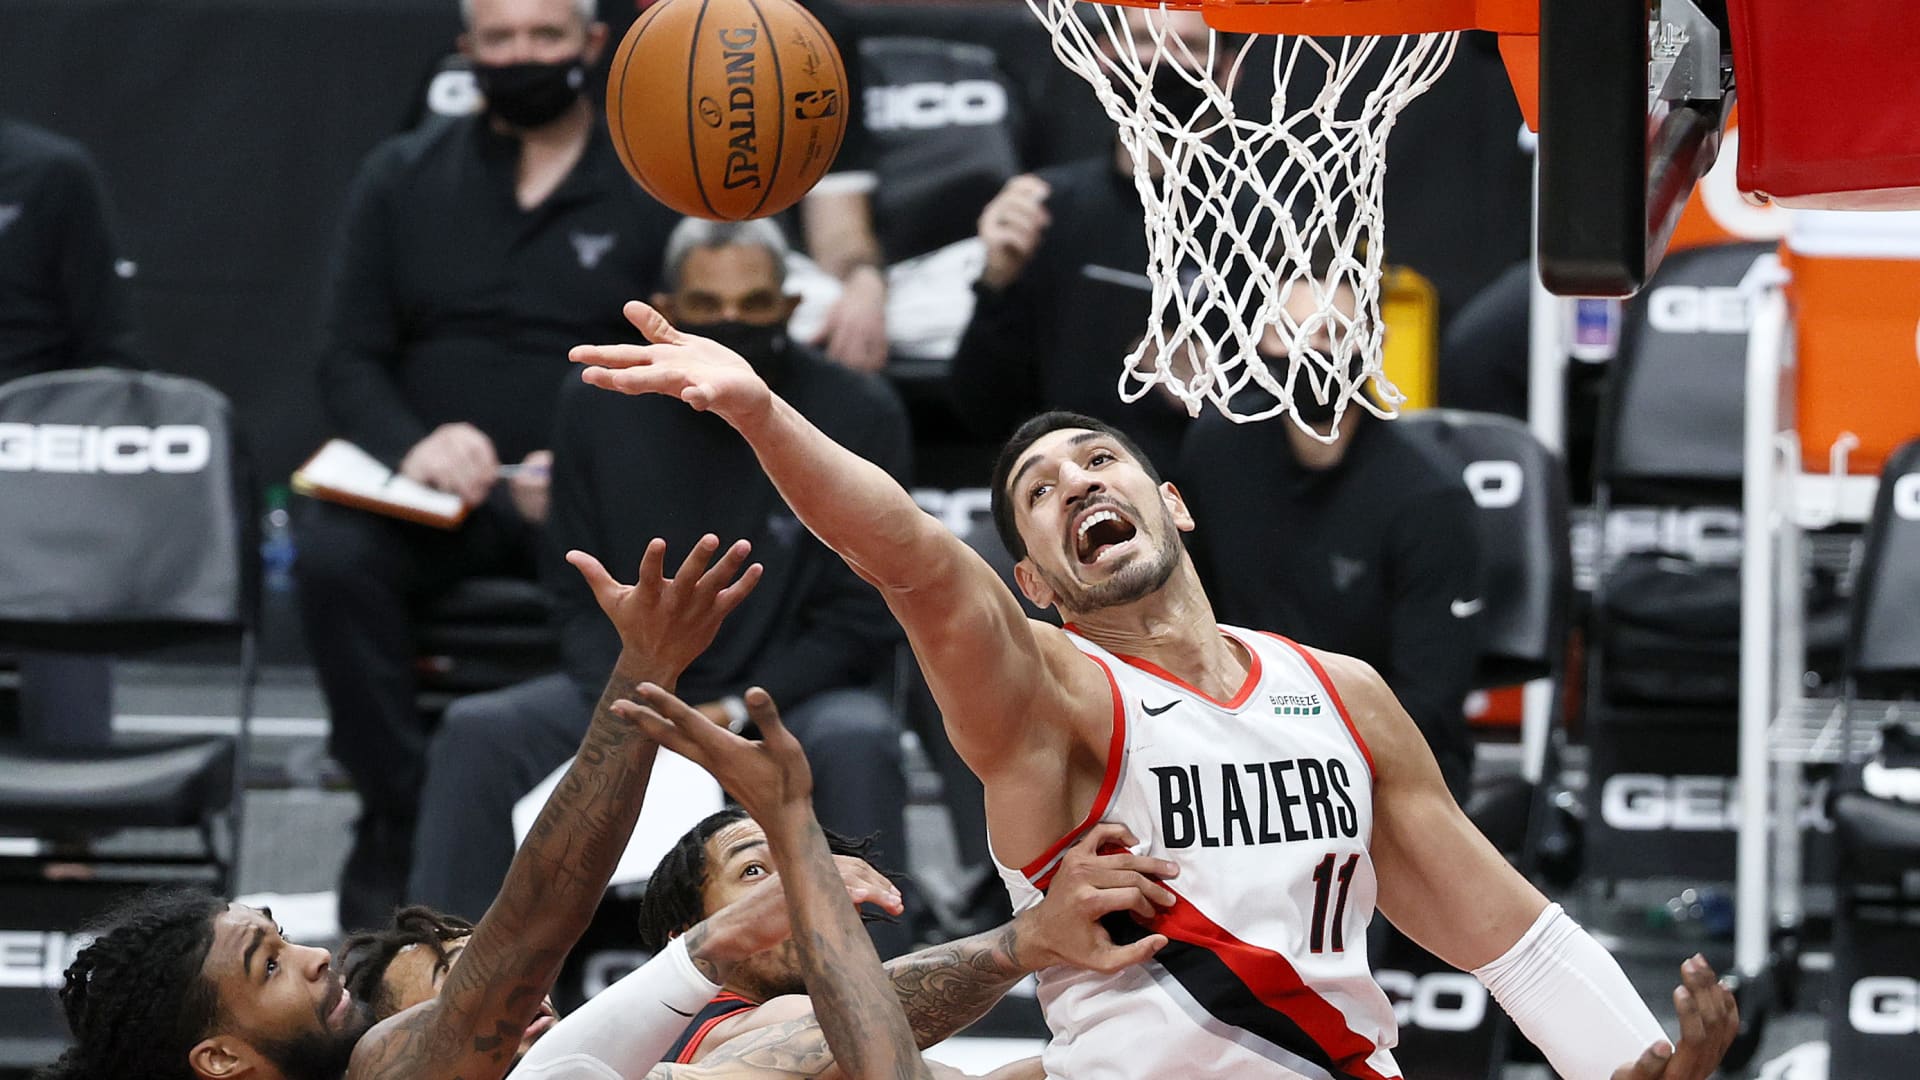 Enes Kanter #11 of the Portland Trail Blazers rebounds against the Chicago Bulls in the second quarter at Moda Center on January 05, 2021 in Portland, Oregon.